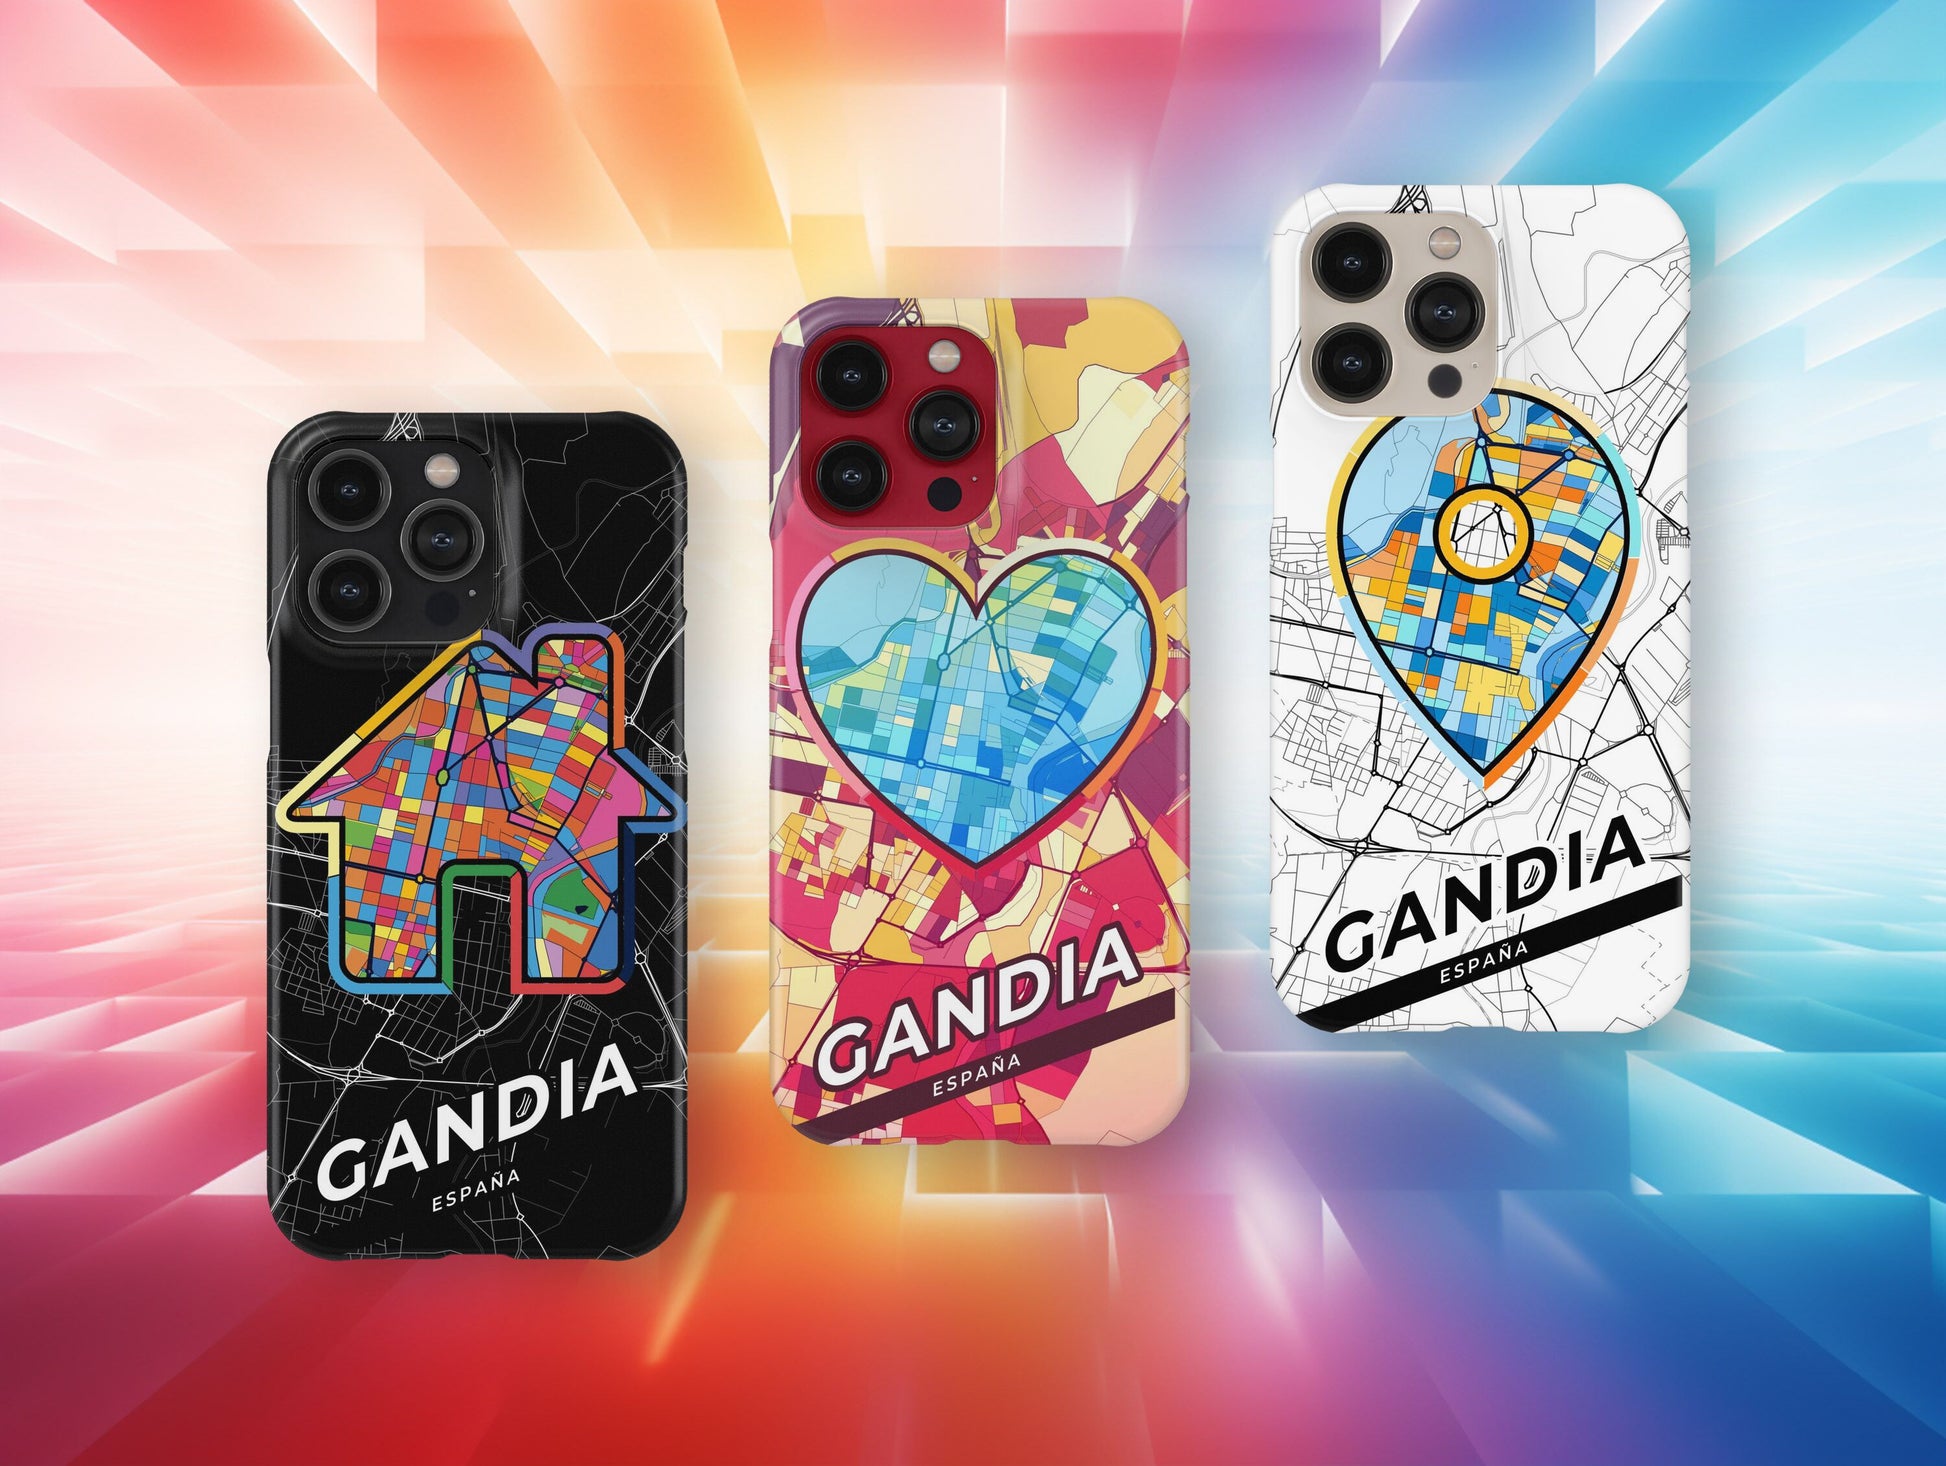 Gandia Spain slim phone case with colorful icon. Birthday, wedding or housewarming gift. Couple match cases.